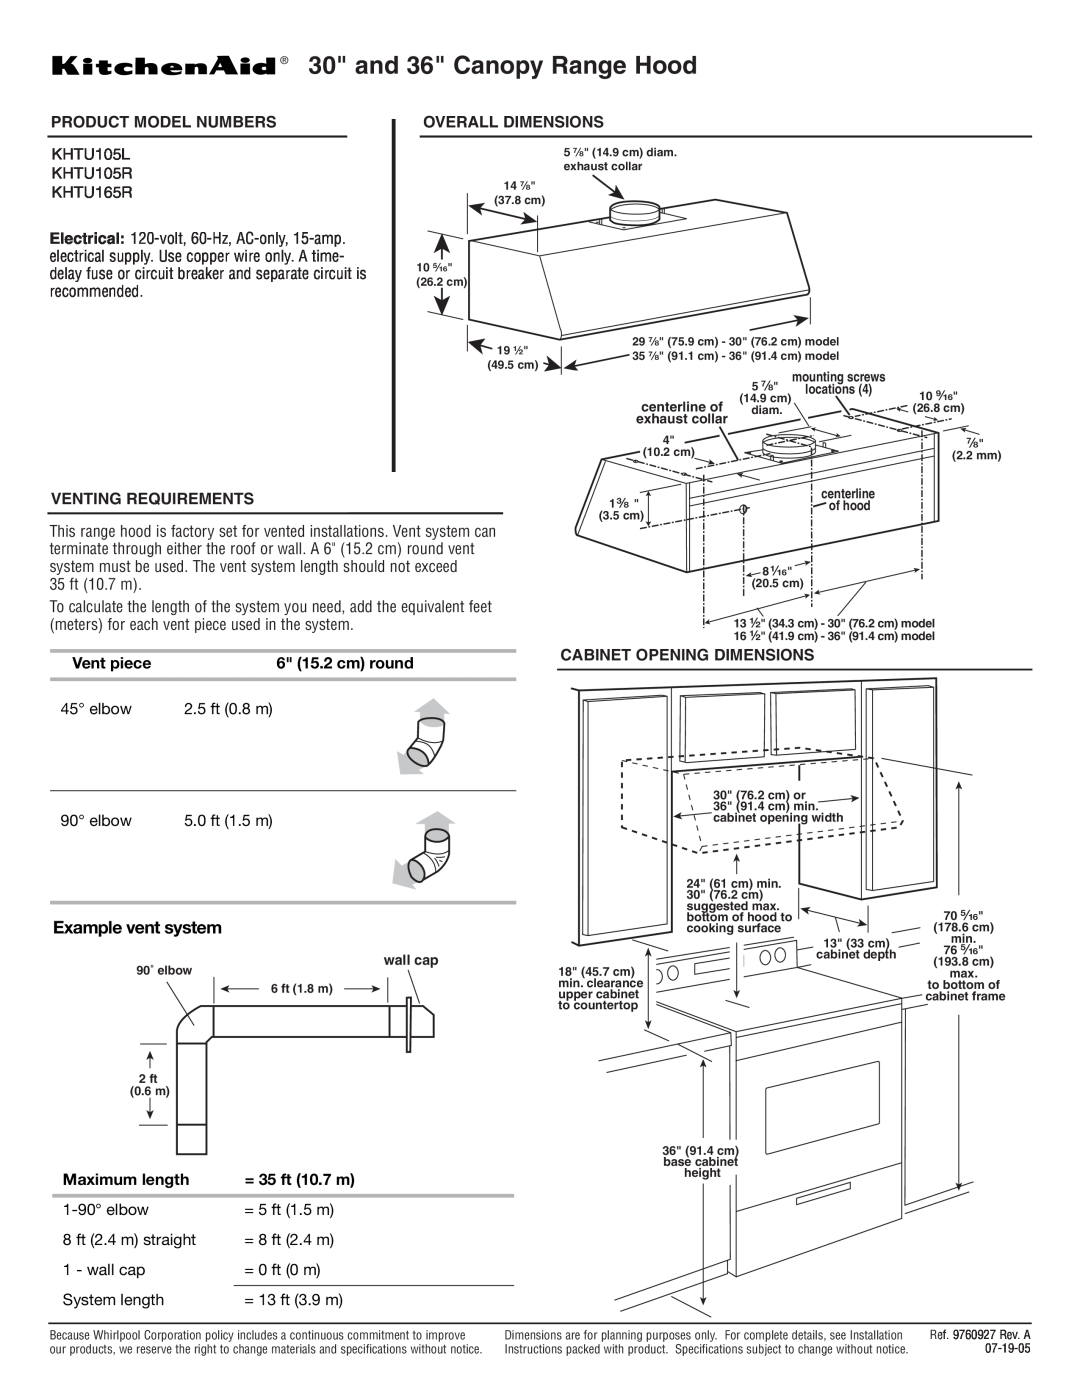 KitchenAid KHTU165R dimensions and 36 Canopy Range Hood, Example vent system, Product Model Numbers, Venting Requirements 